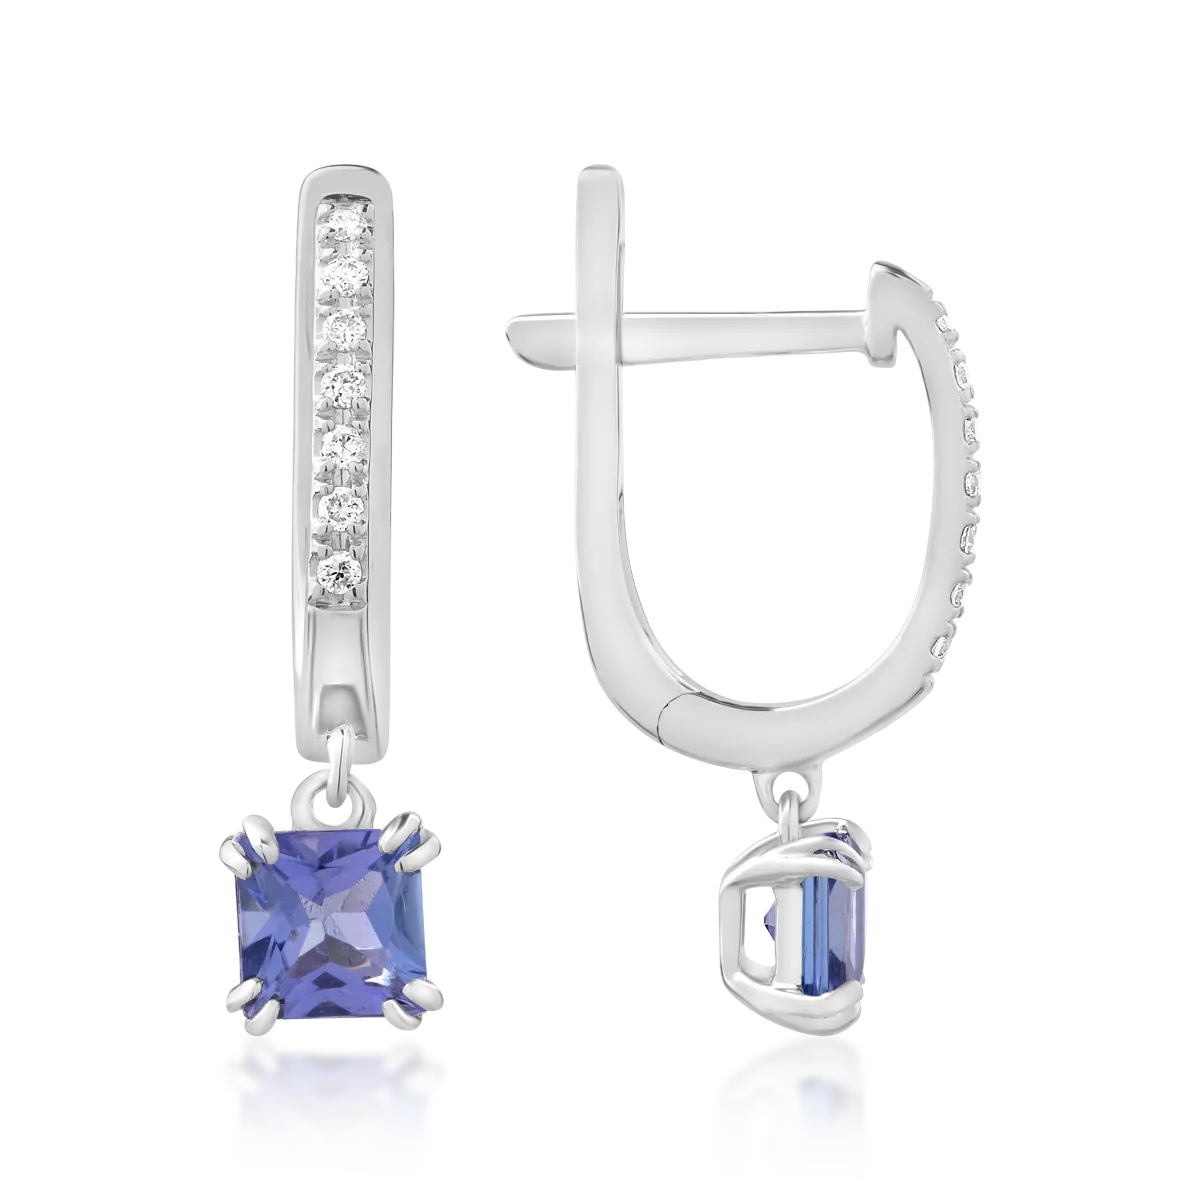 18K white gold earrings with tanzanite of 0.775ct and diamonds of 0.05ct